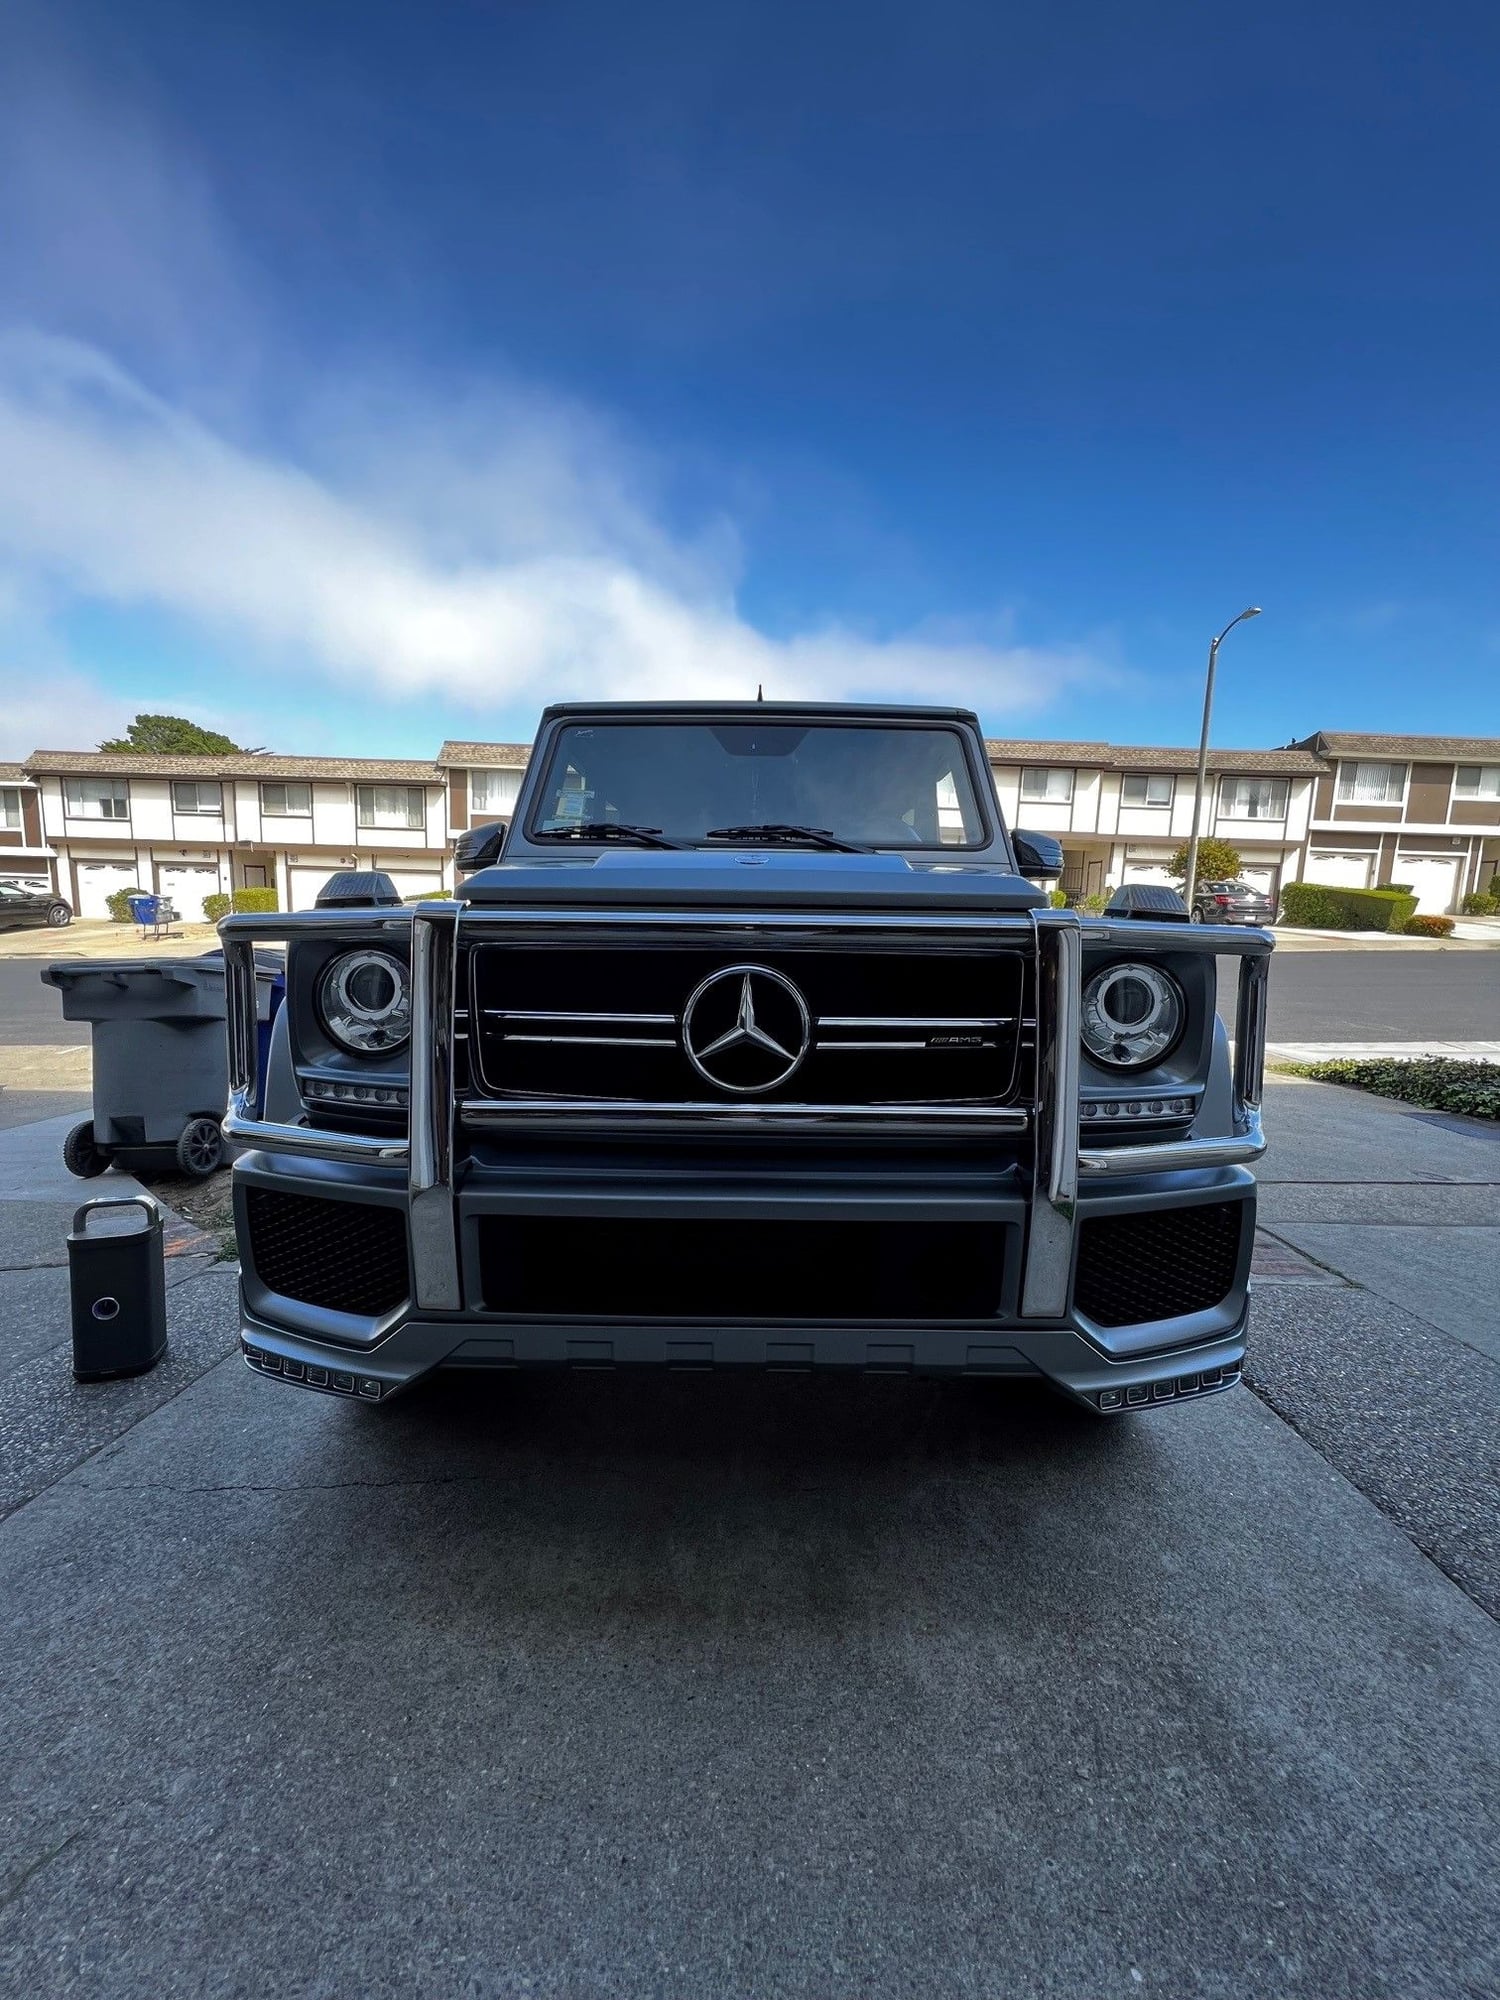 Exterior Body Parts - Chrome Brushguard - Used - 2016 to 2018 Mercedes-Benz G-Class - San Francisco, CA 94134, United States